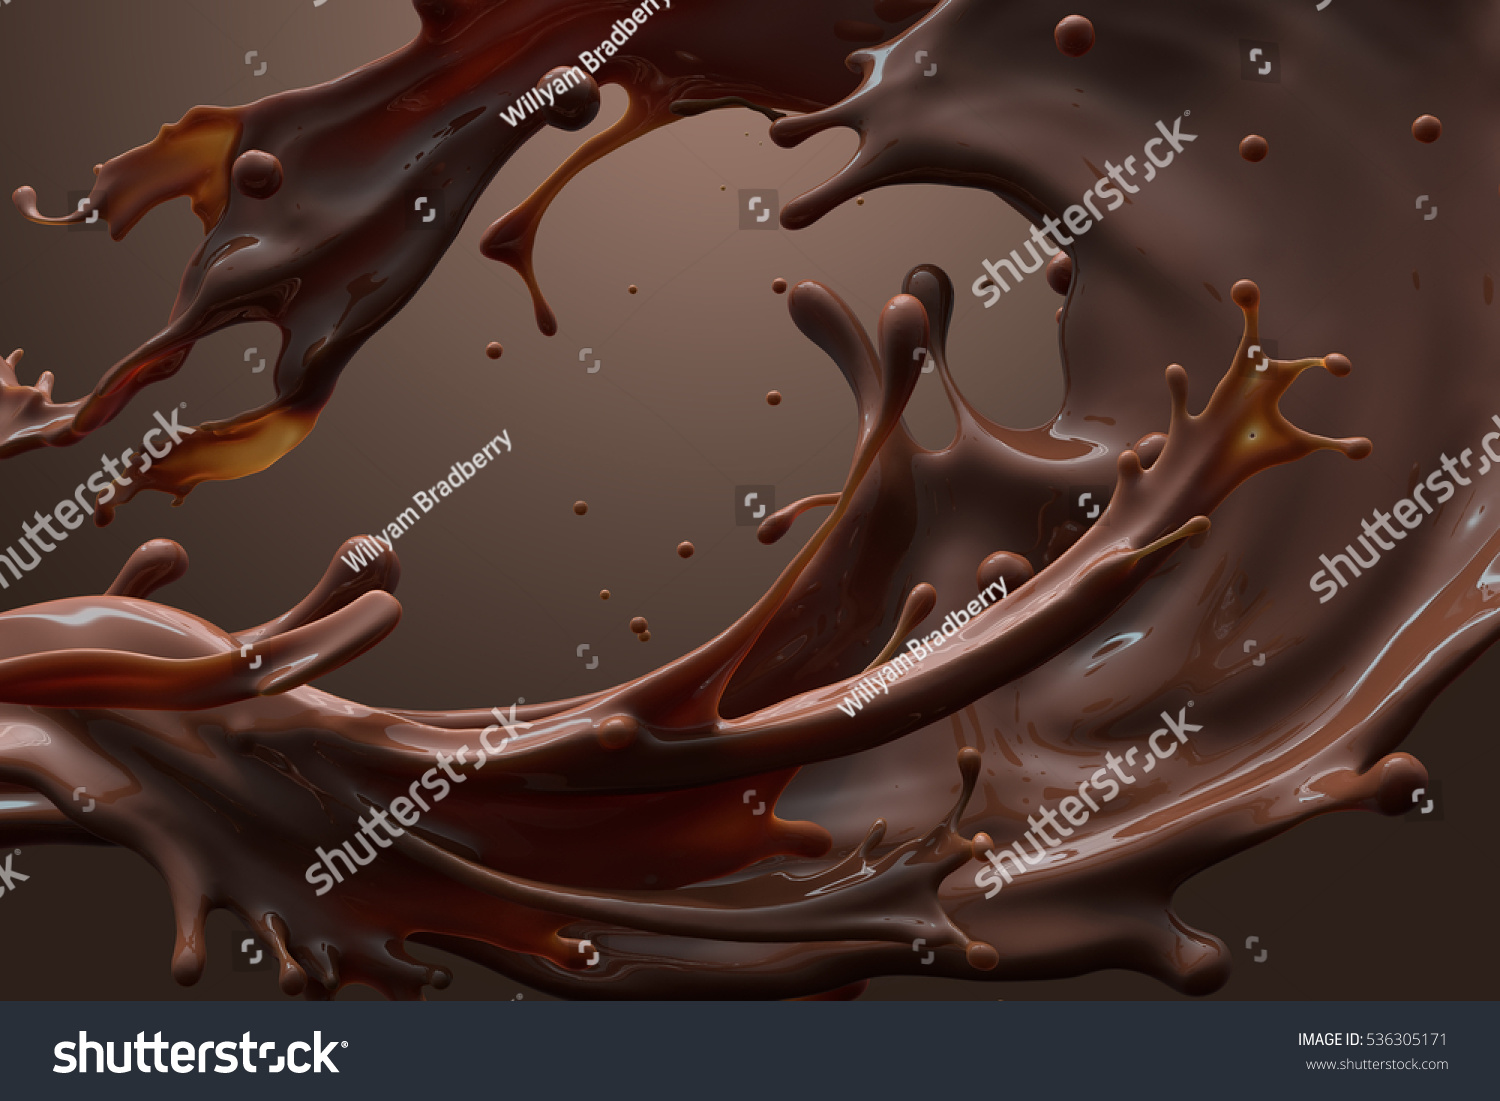 splash of brownish hot coffee or chocolate on brown background. #536305171